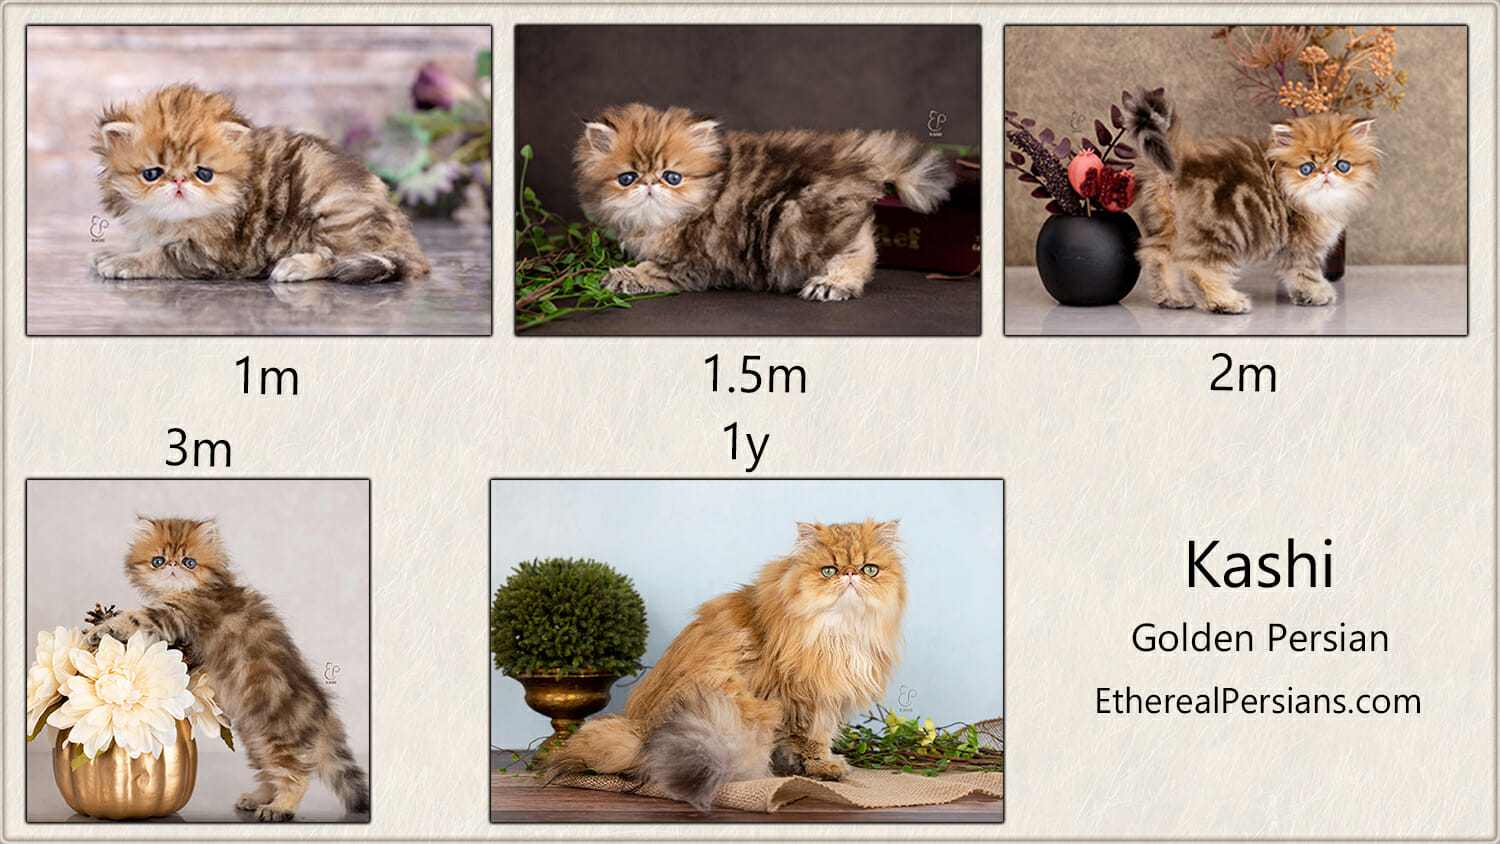 Transformation of shaded golden persian cat with classical markings from kitten to adult, from 1 month to 1 year.